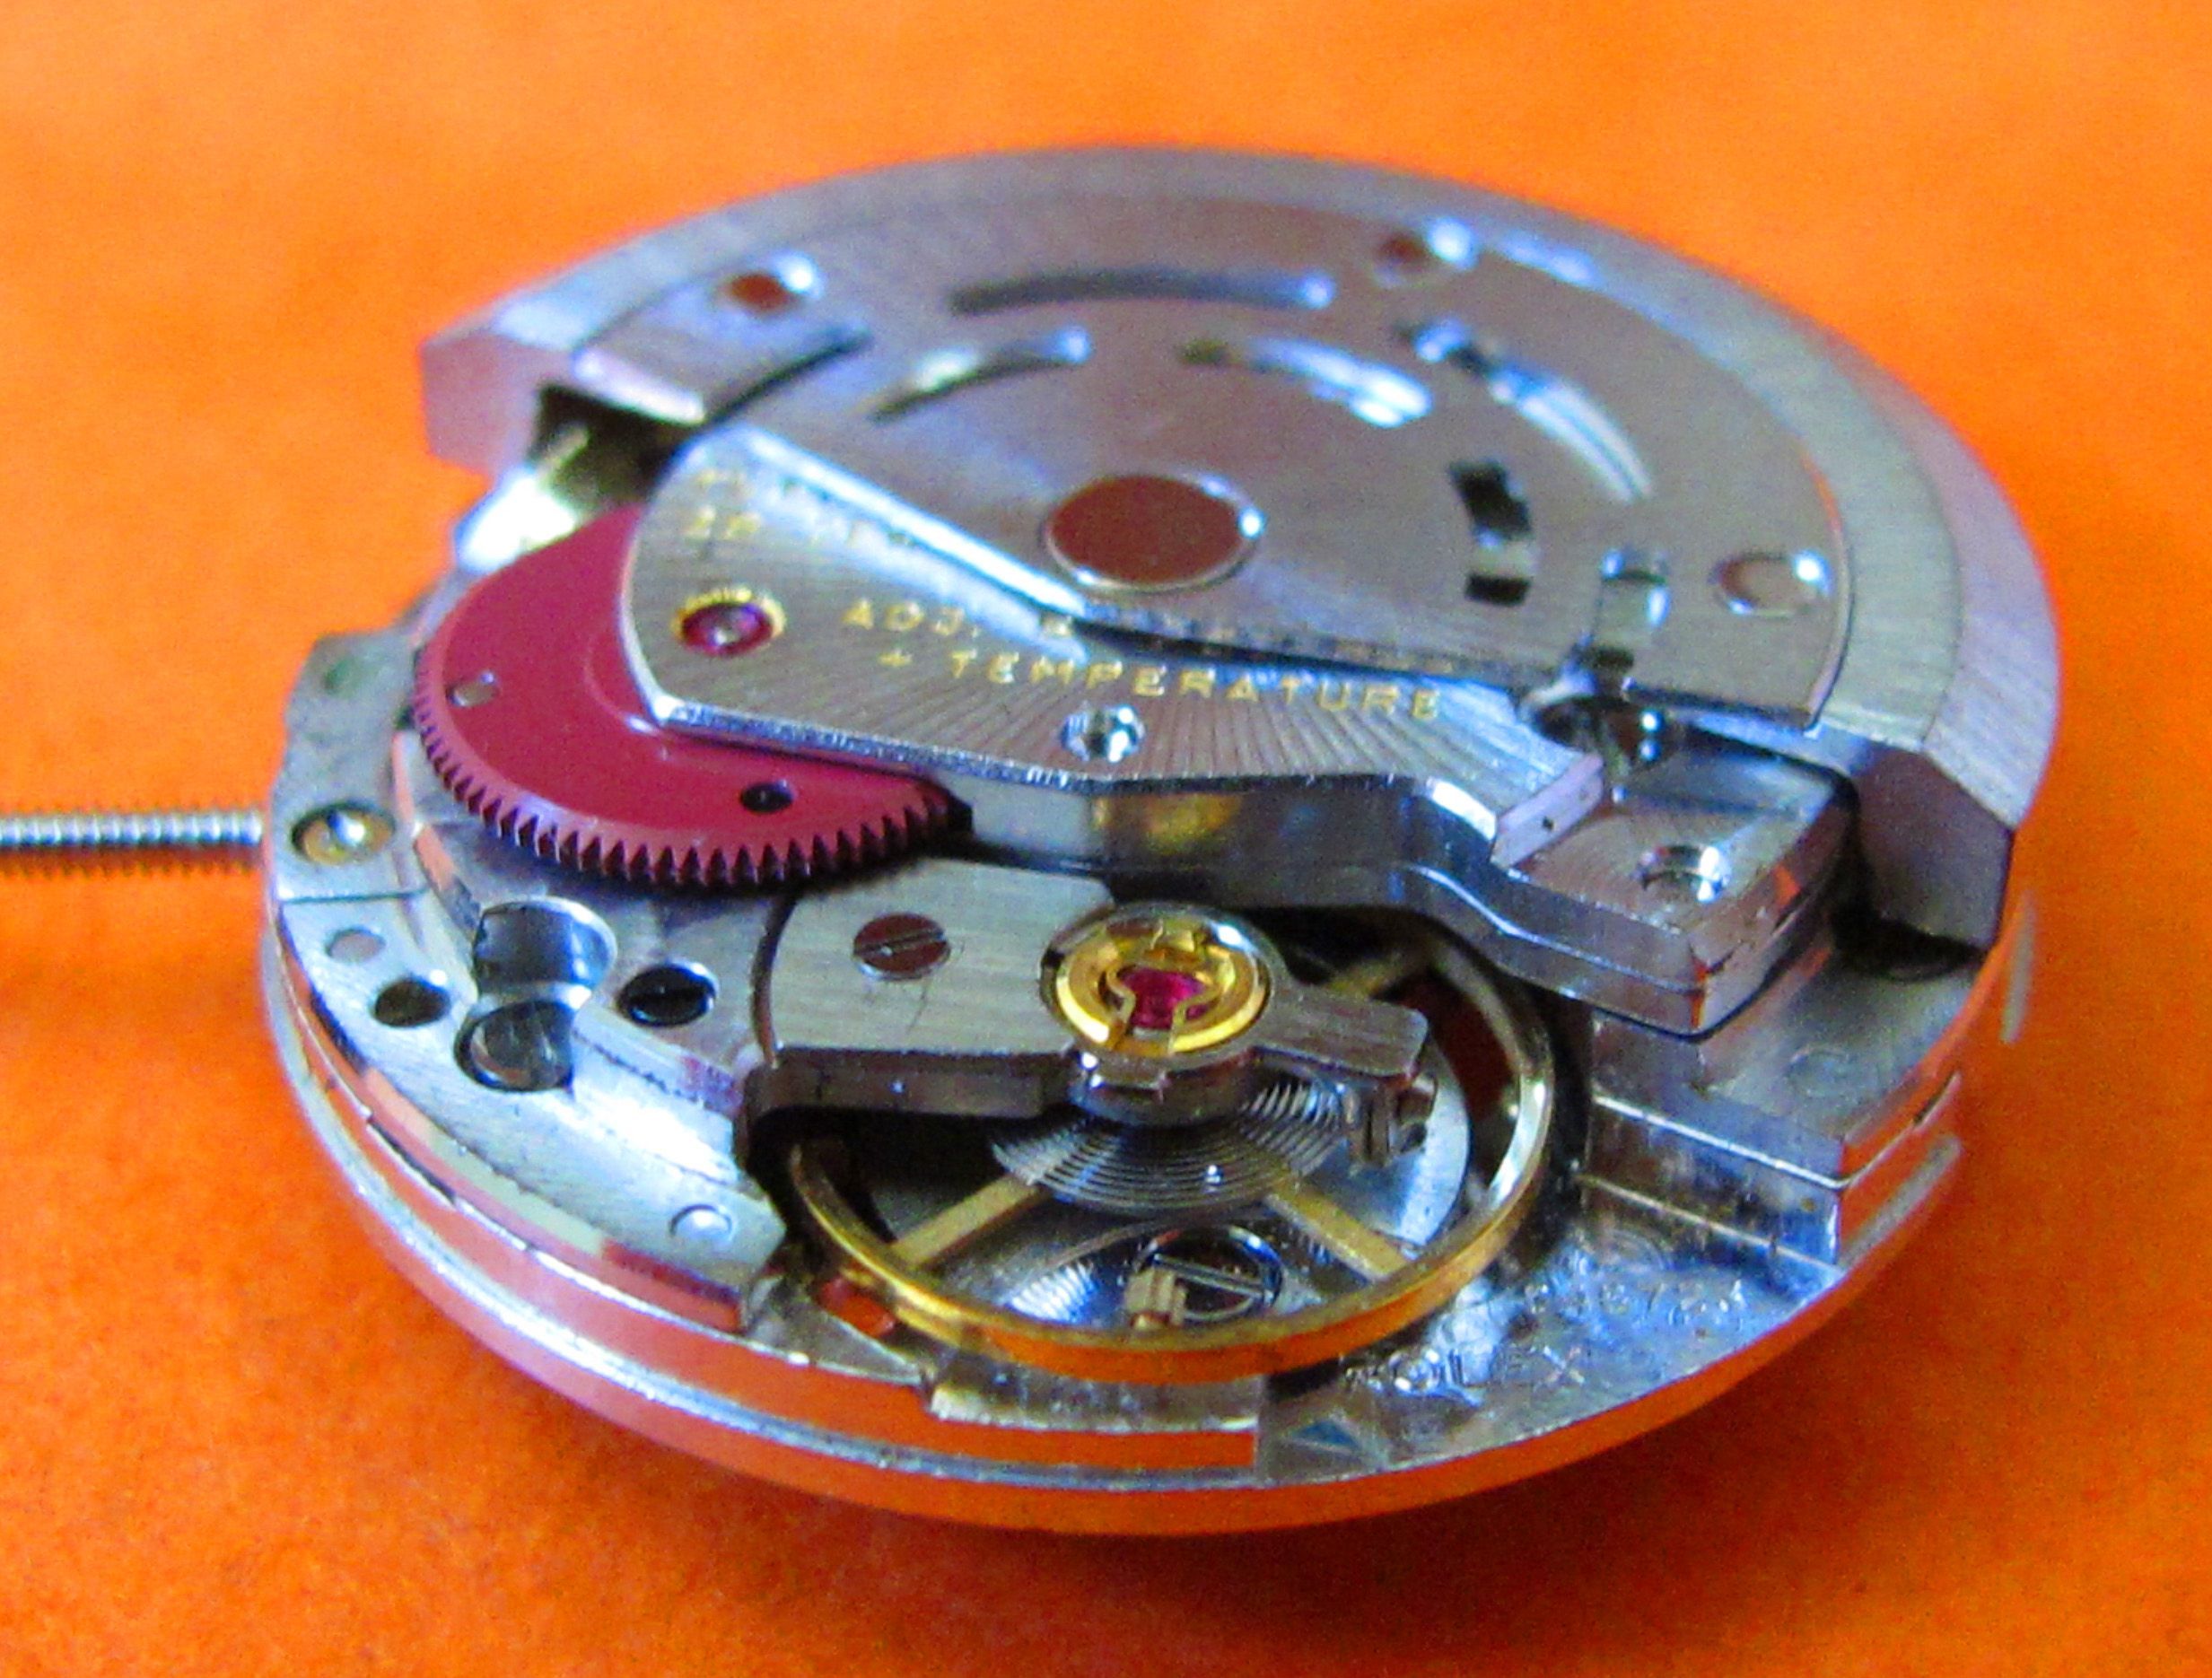 Rolex Factory 2130 Preowned Movement 